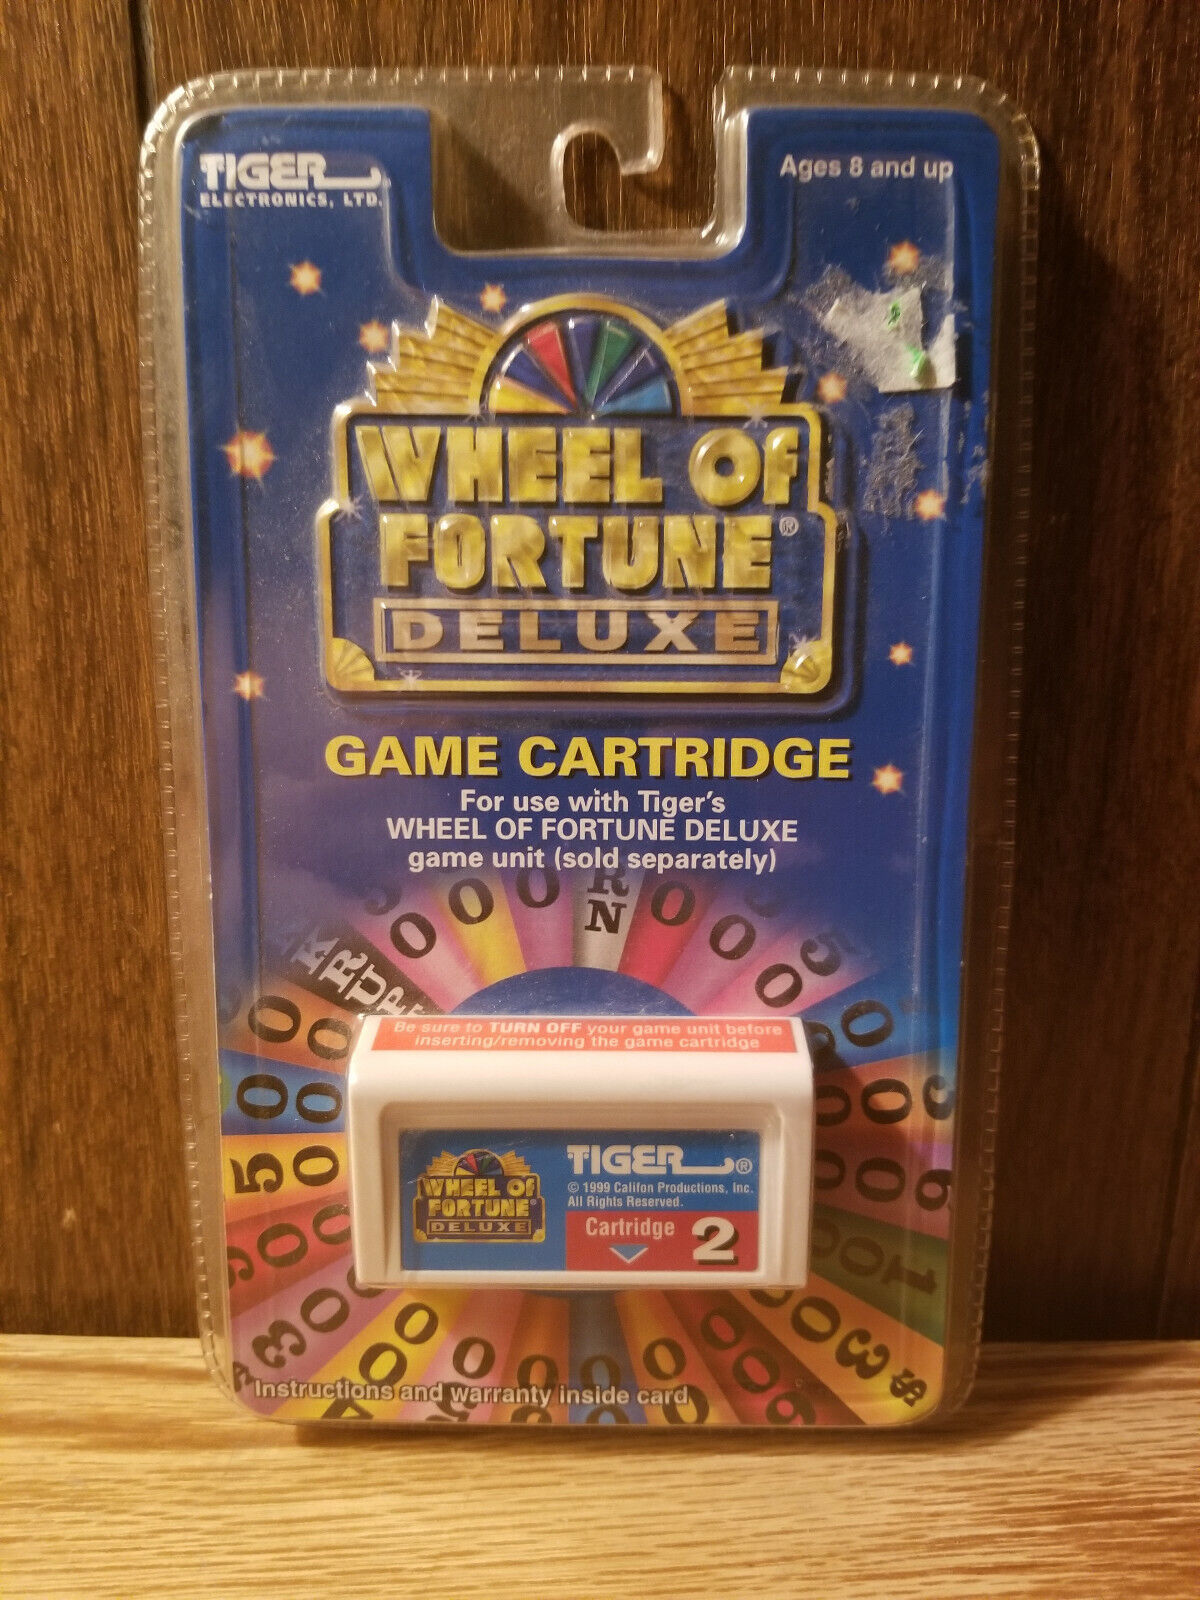 Tiger 1999 Wheel of Fortune Deluxe Game Cartridge Electronic Handheld # 2 New